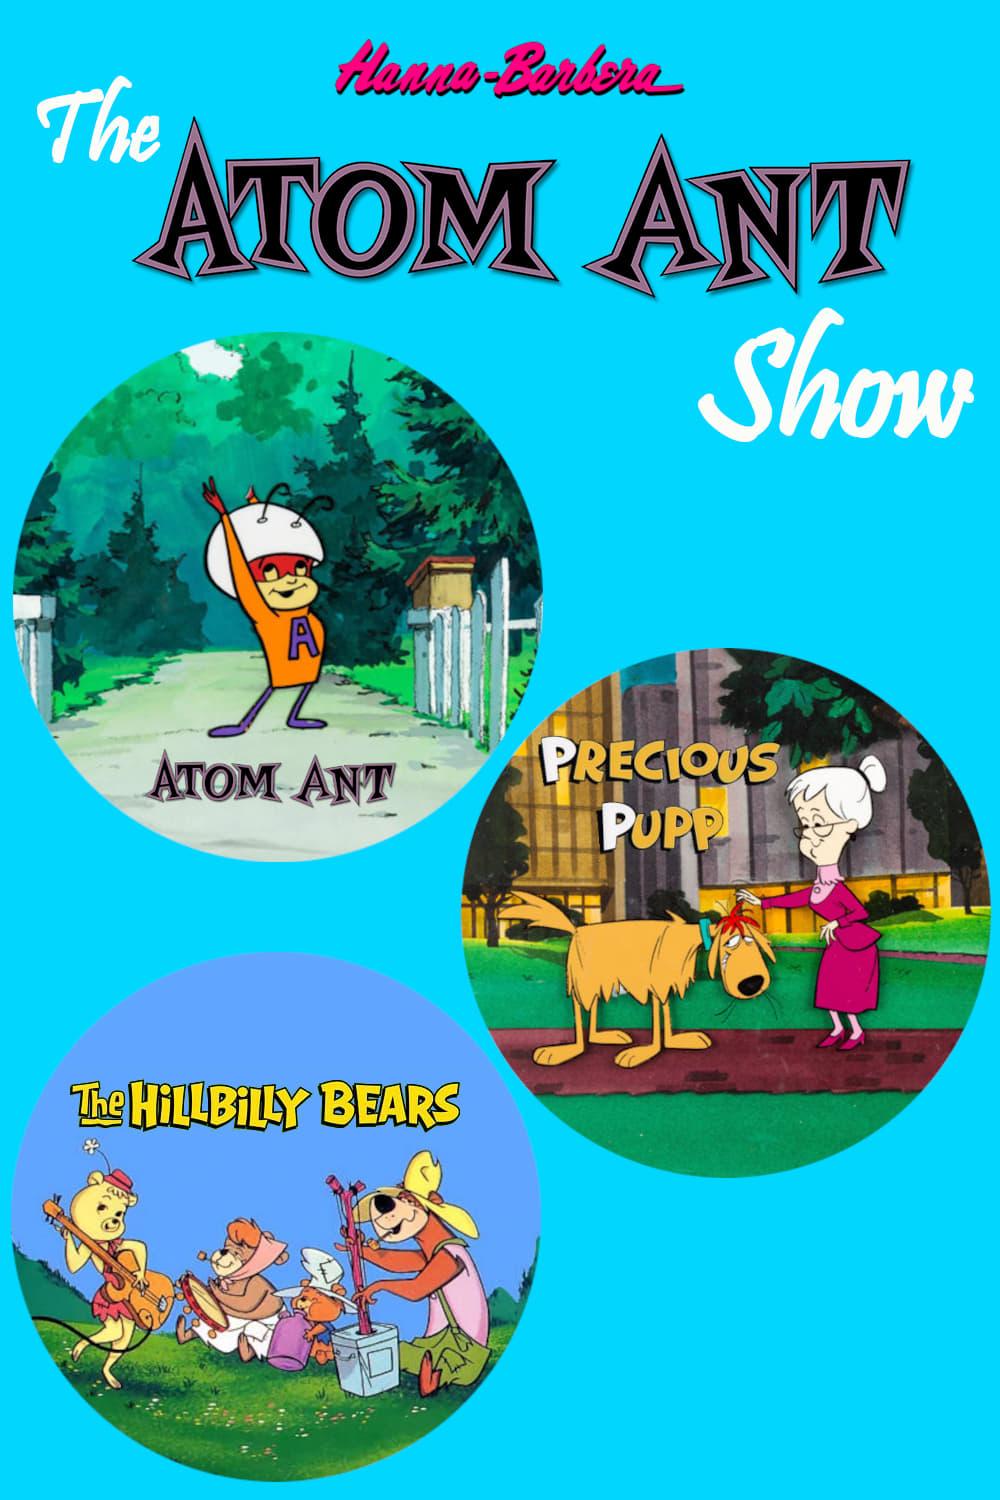 The Atom Ant Show poster